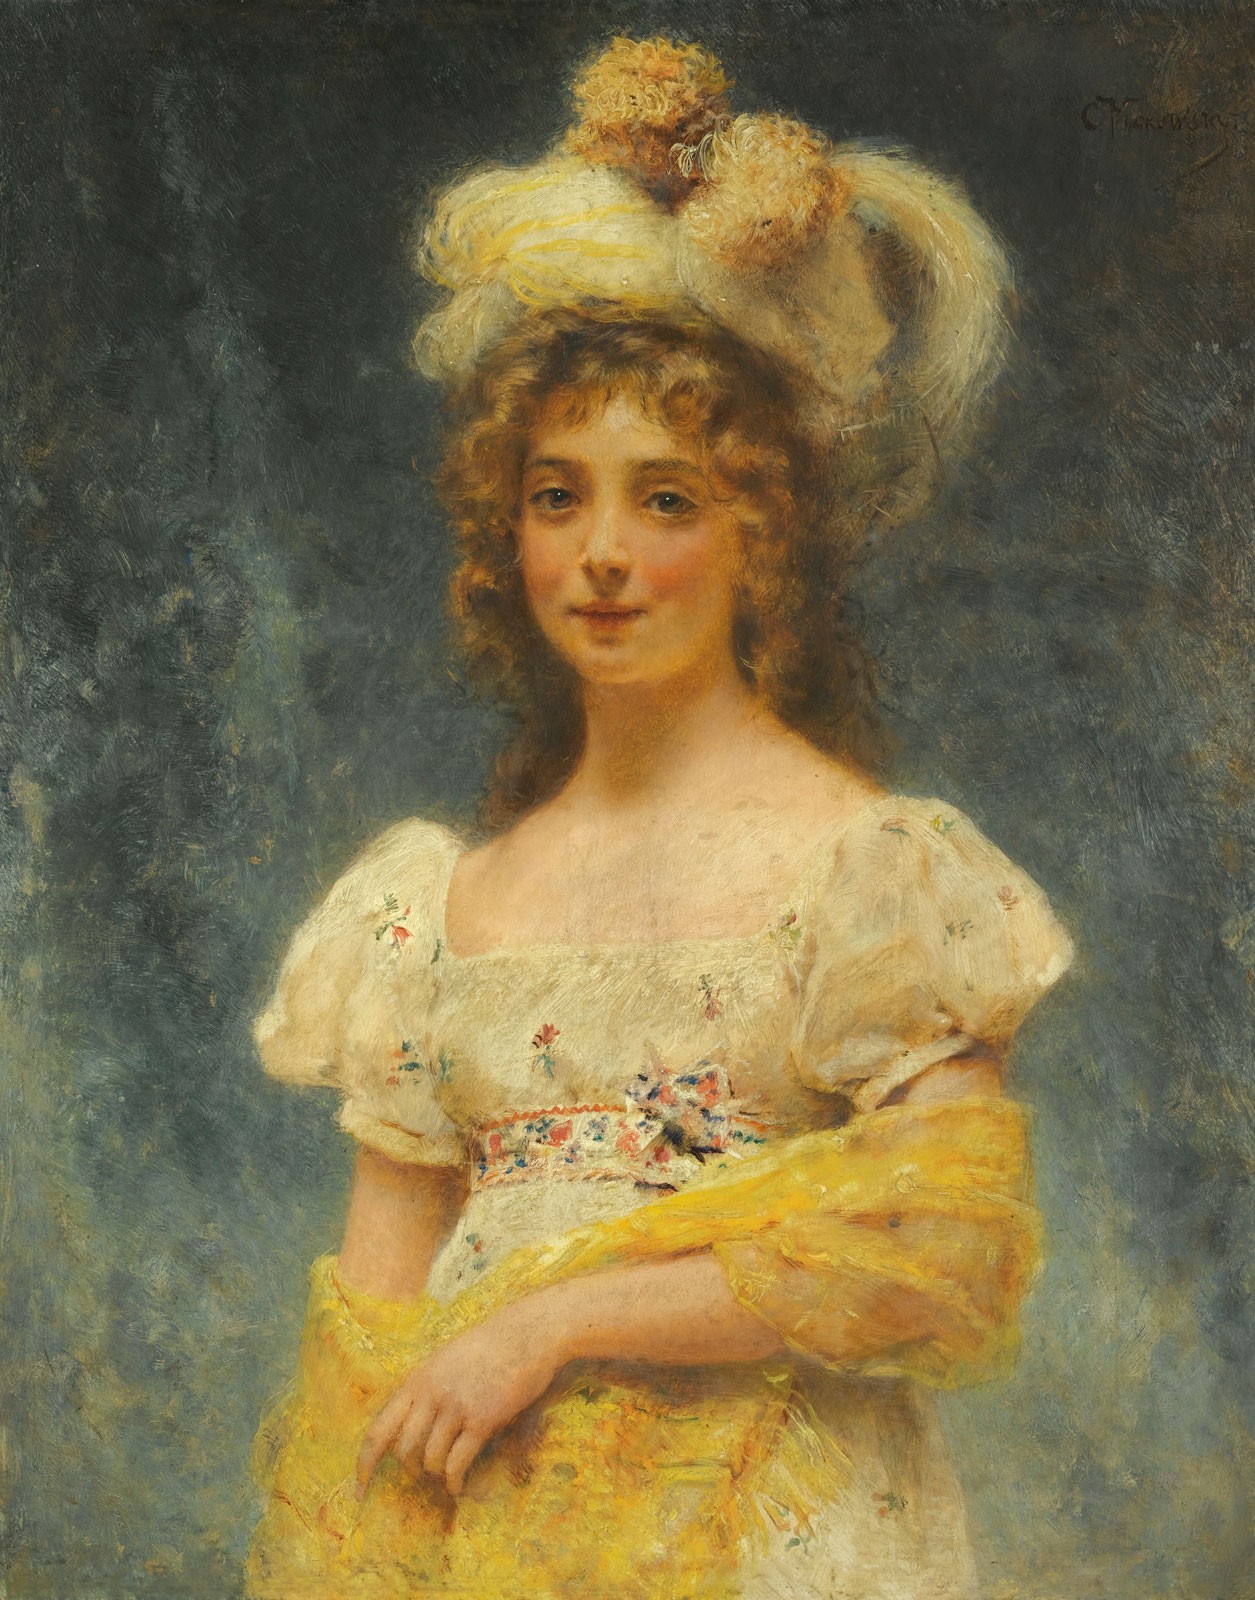 Portrait of a Young Girl, c.1890, Oil on Canvas